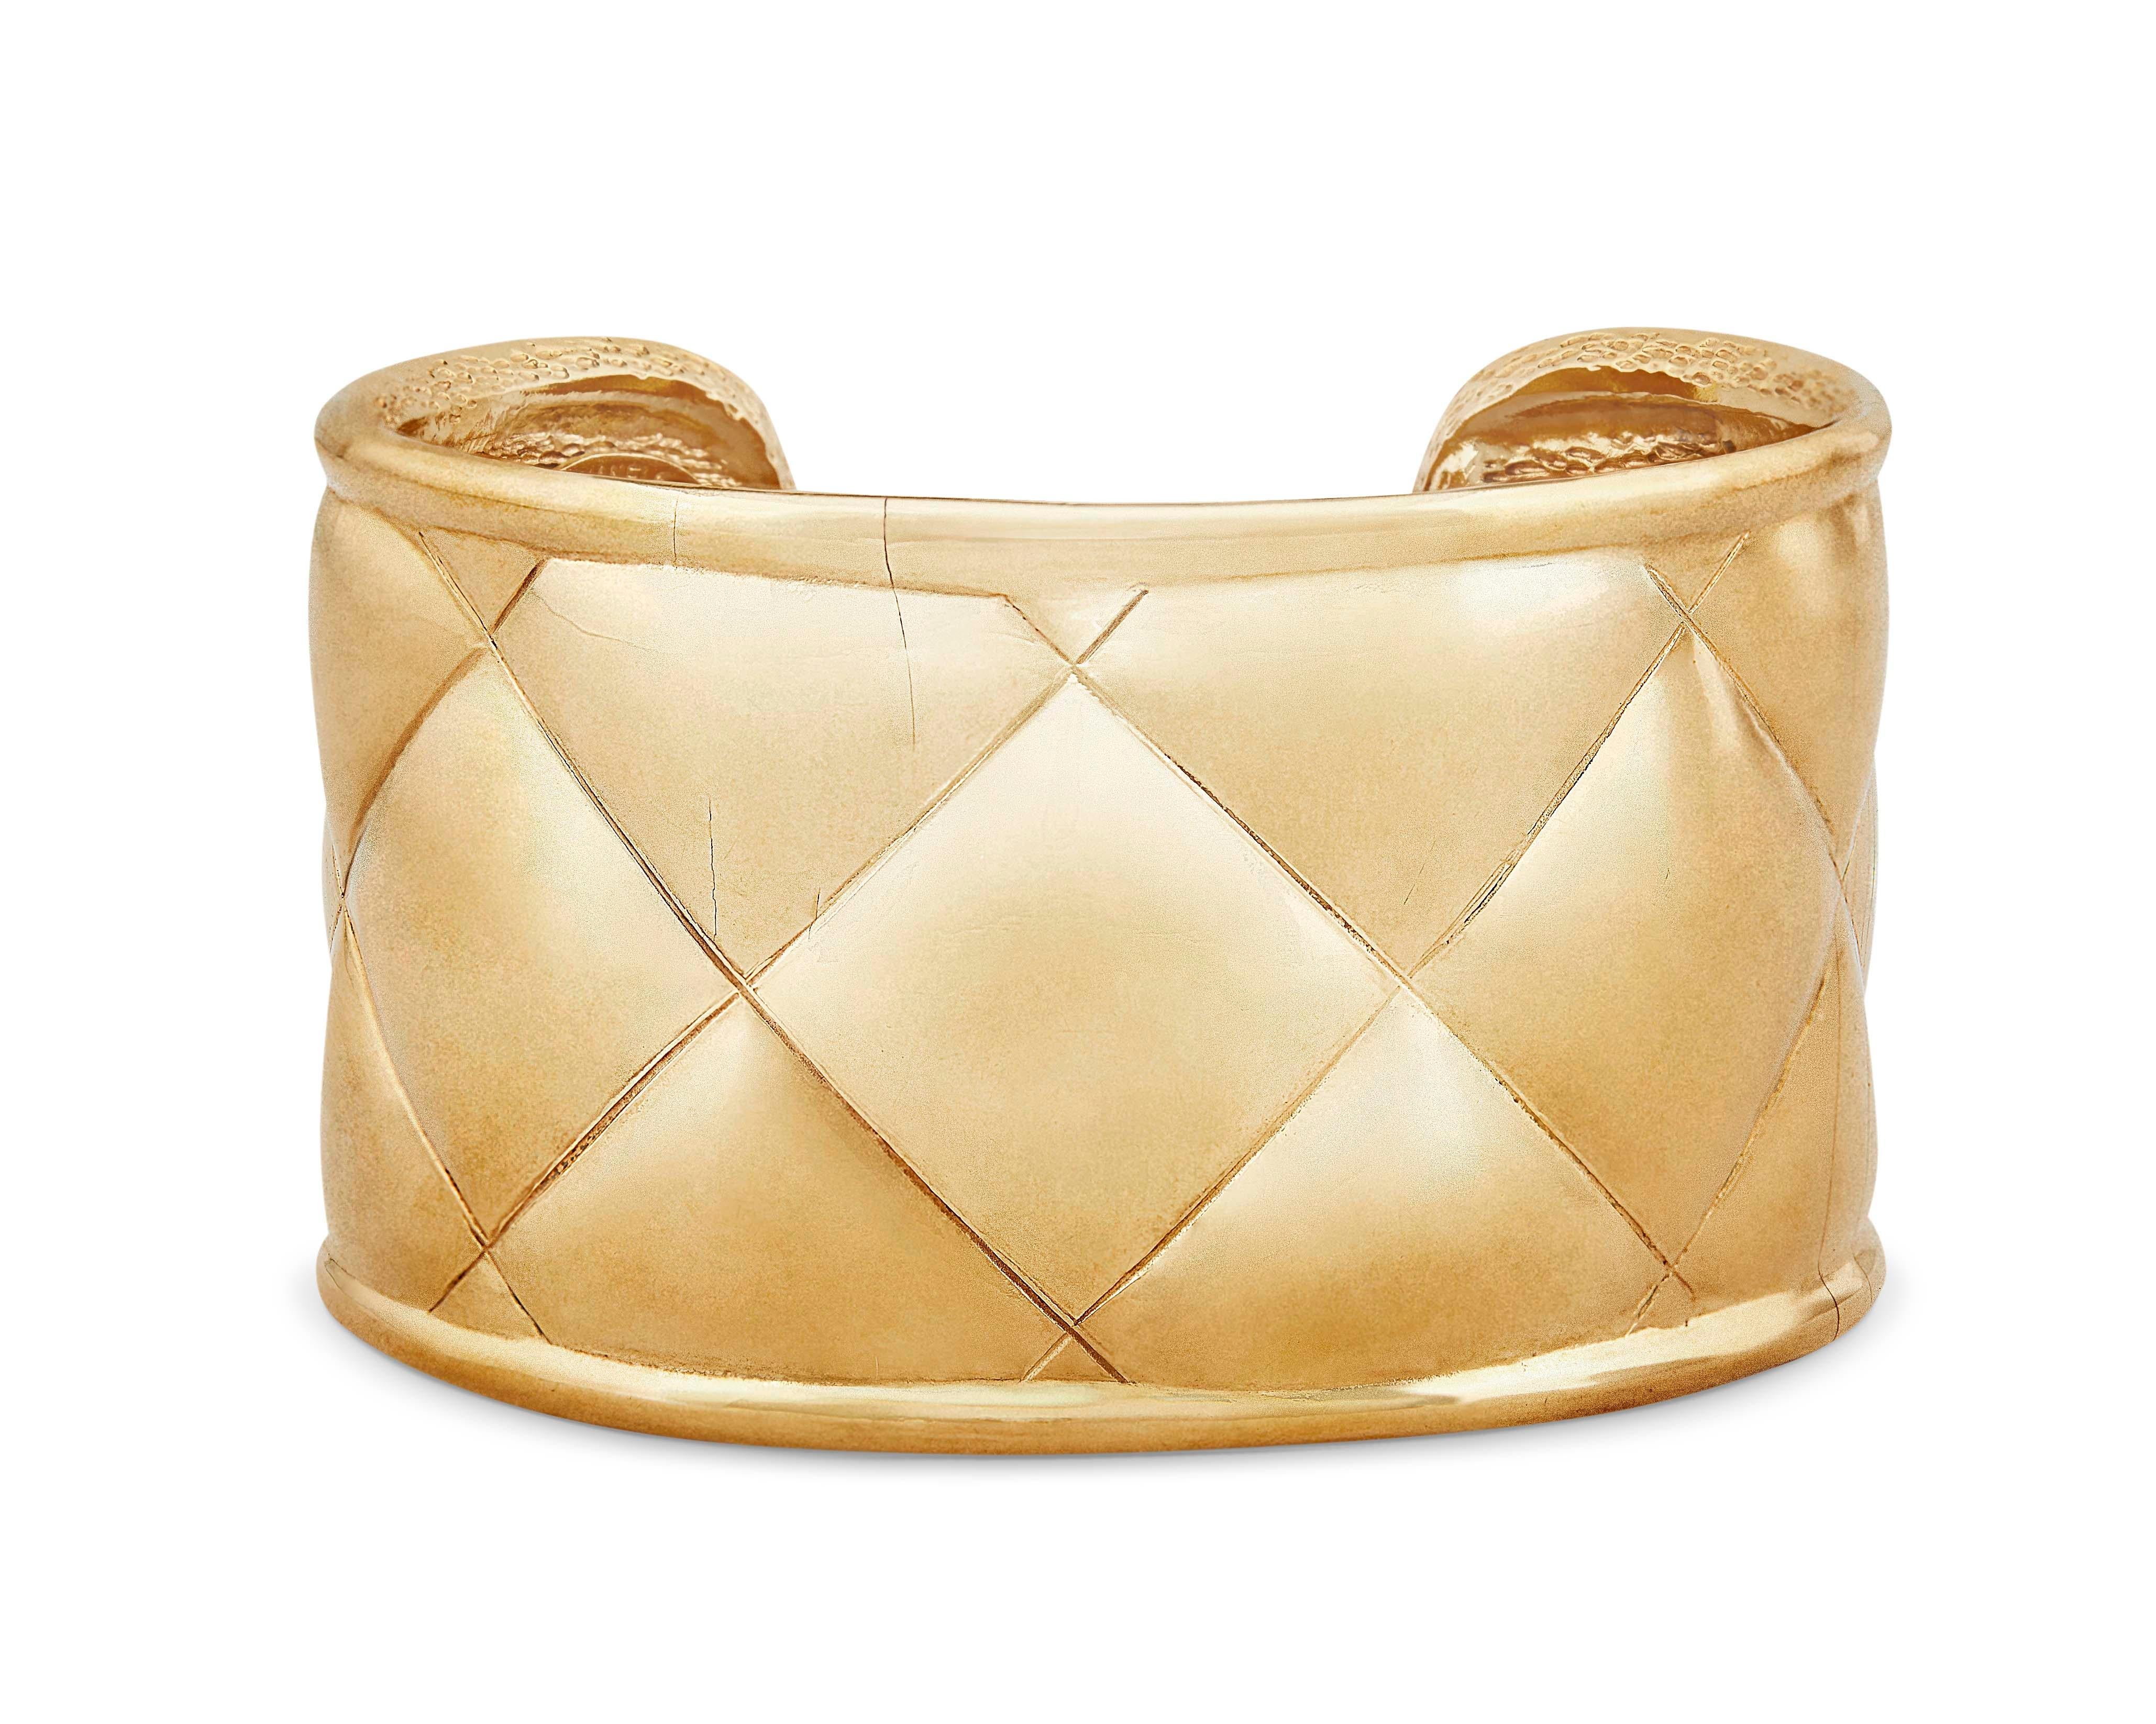 Iconic vintage Chanel Matelasse cuff bracelet in gold plate from the 1980s.  This collector's item features the signature Chanel quilted pattern all around.  Cuff-style bracelet features an open back and slips on.

Bracelet measures approximately 2